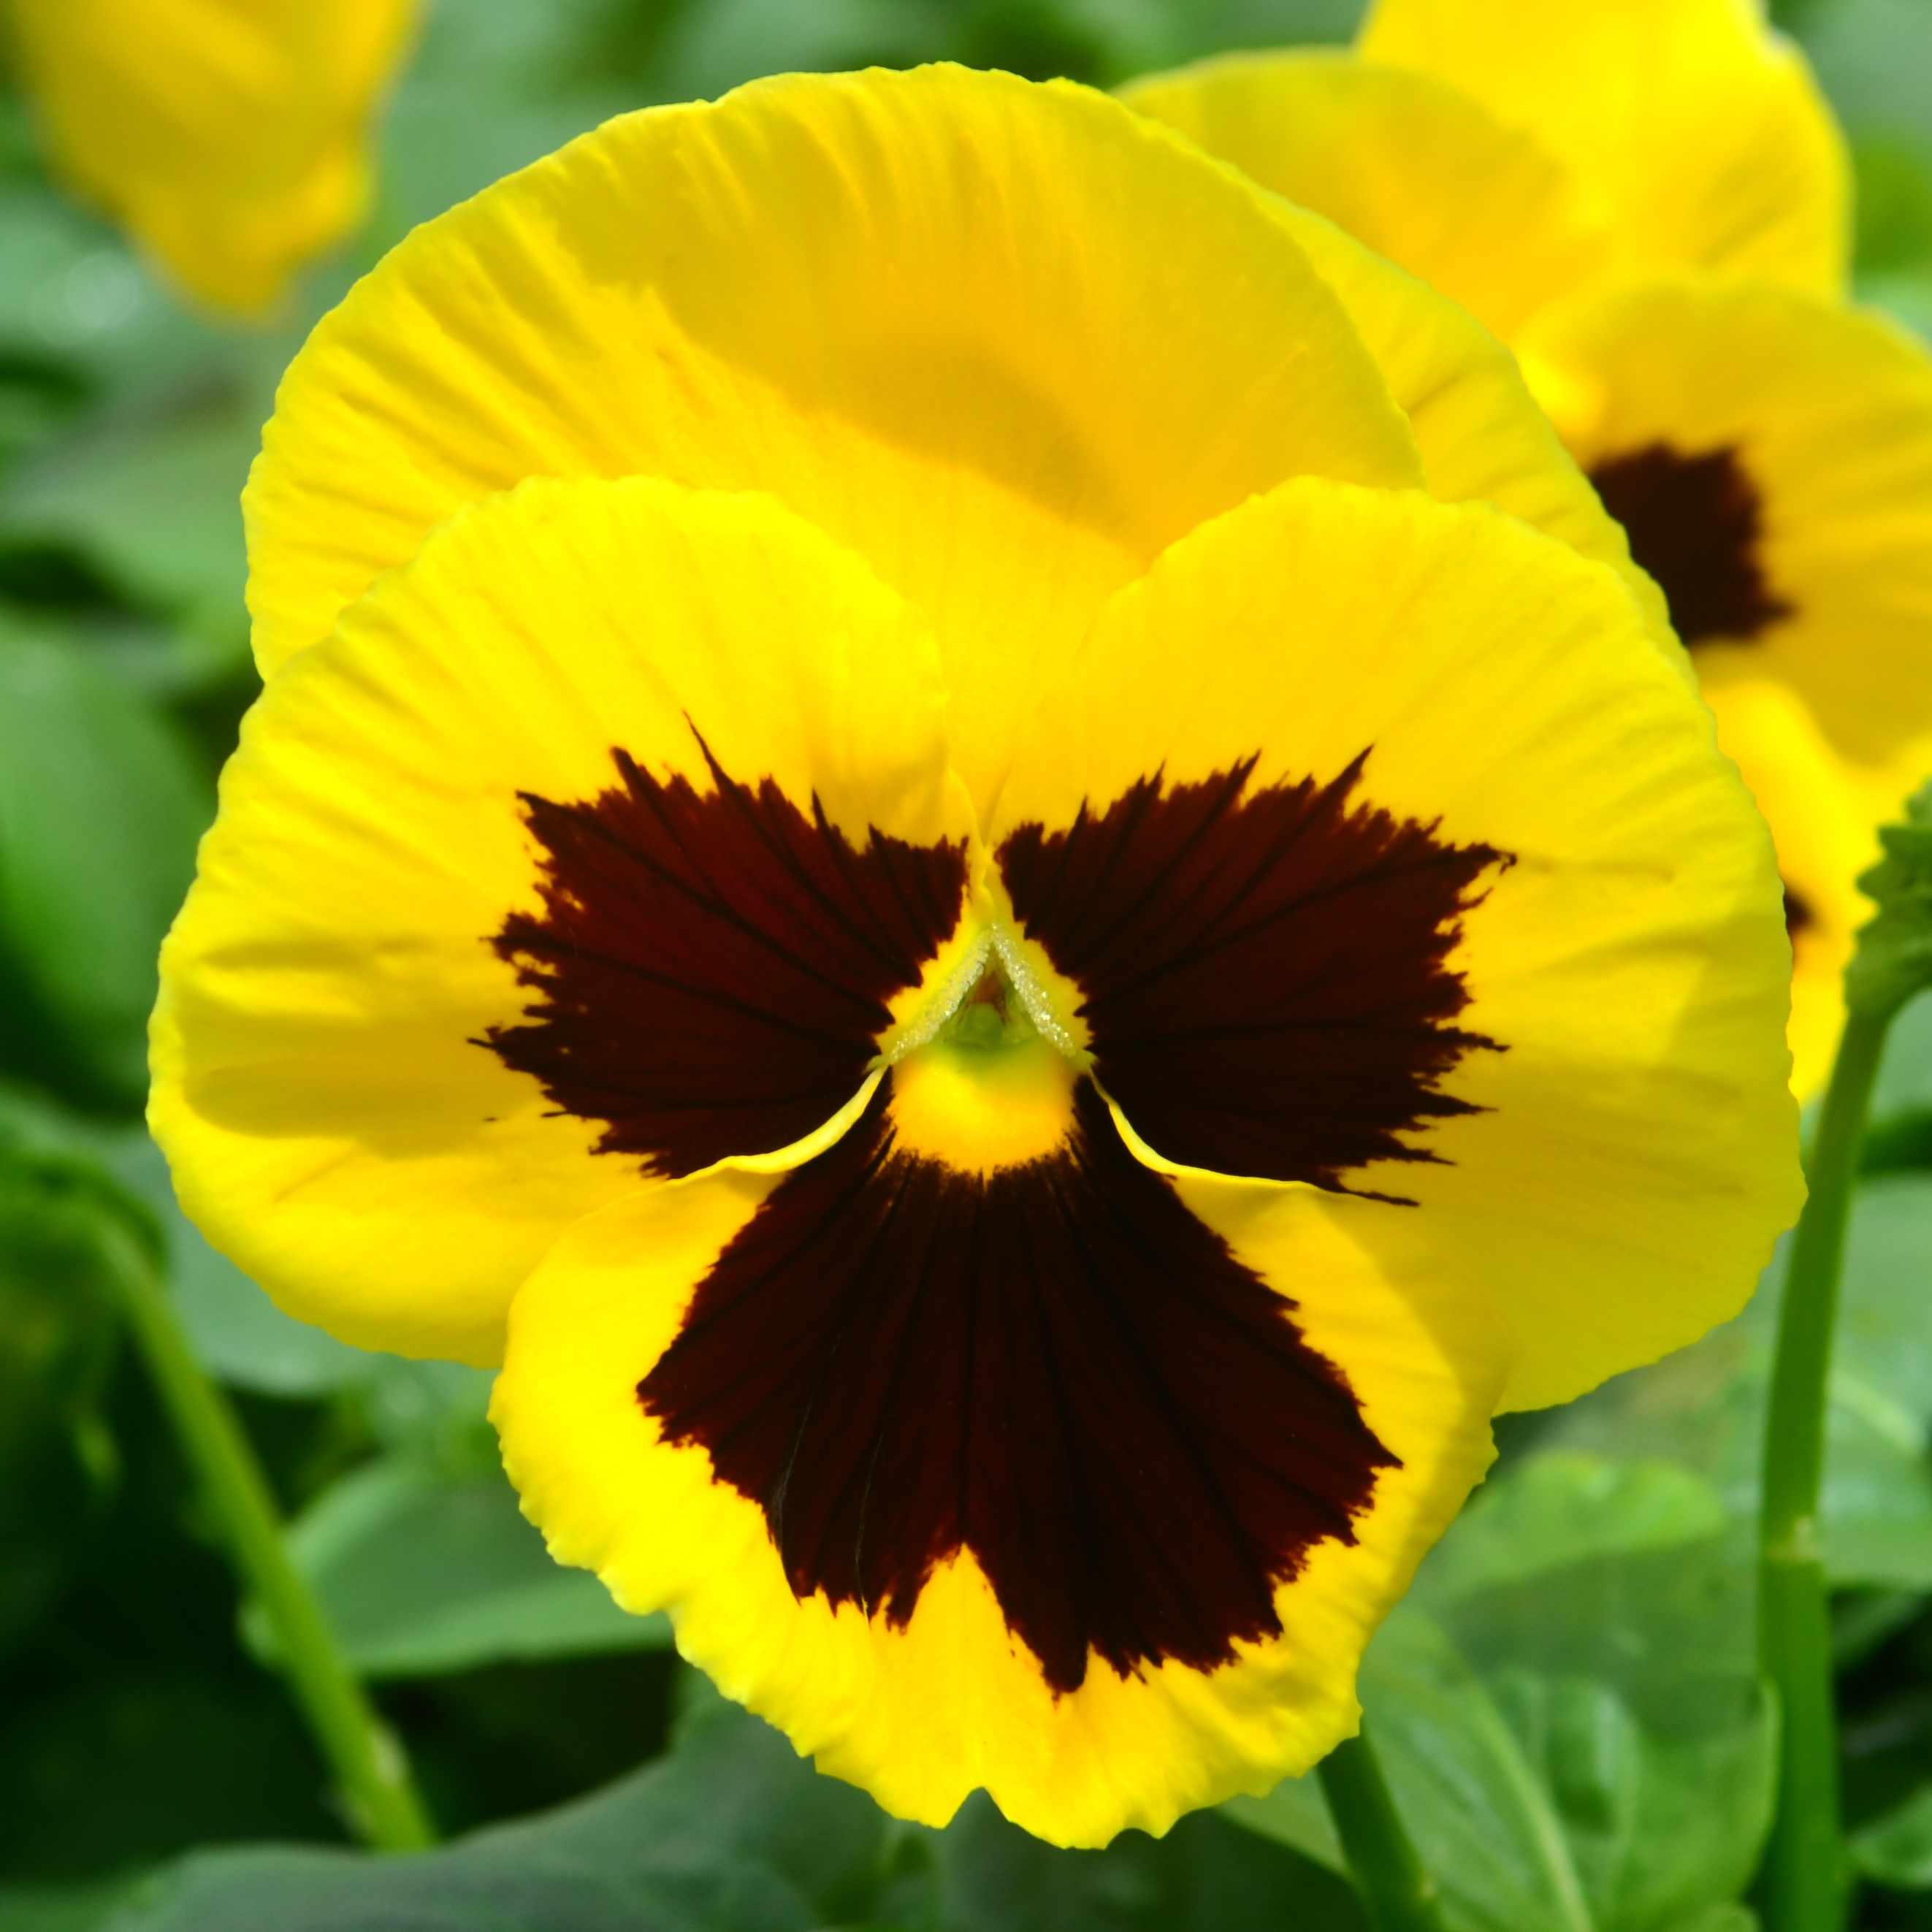 Viola wittrockiana Mammoth 'Queen Bee Yellow' - Pansy from Hillcrest Nursery